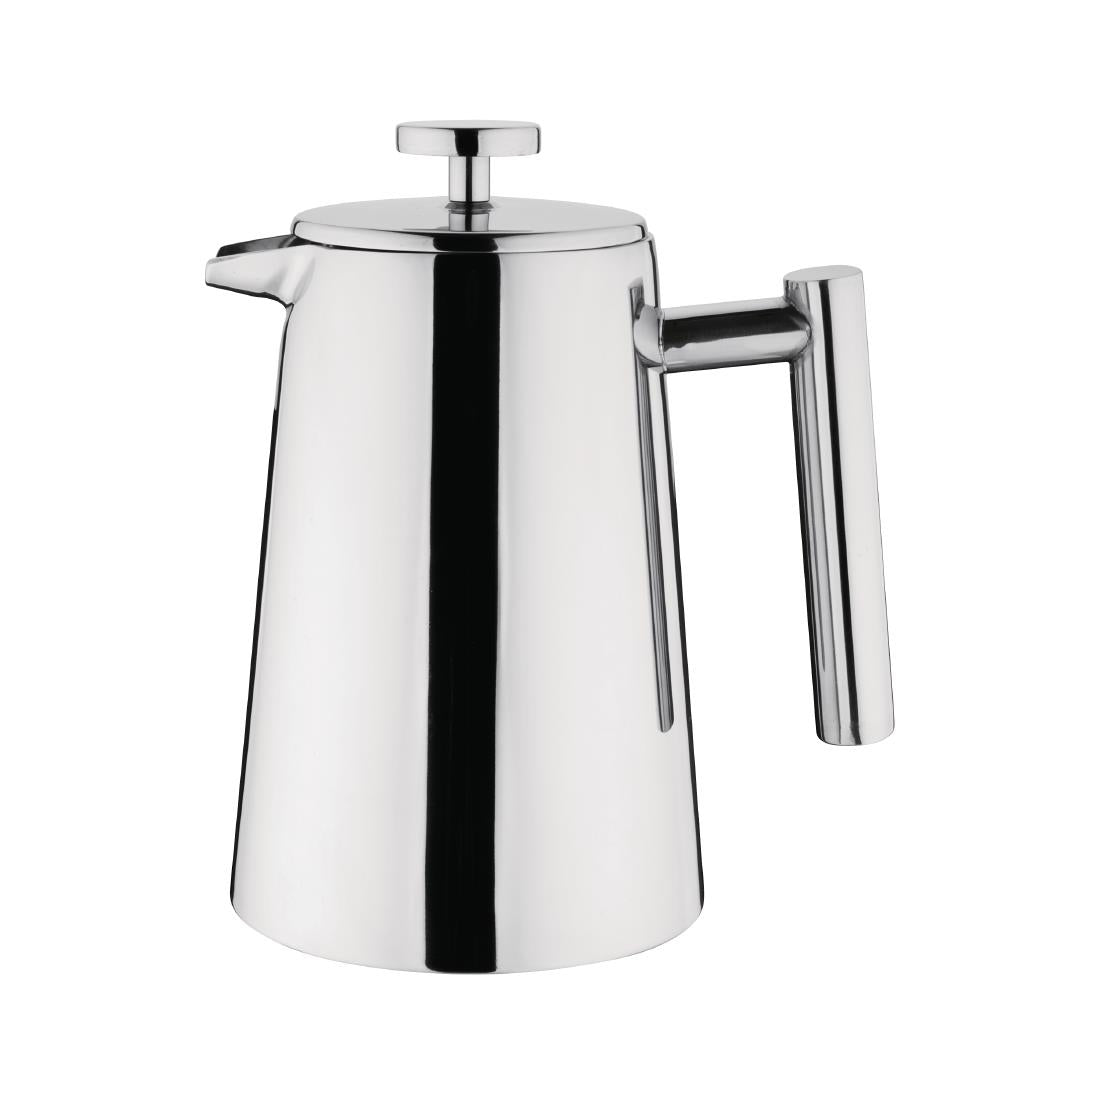 U072 Olympia Insulated Art Deco Stainless Steel Cafetiere 3 Cup